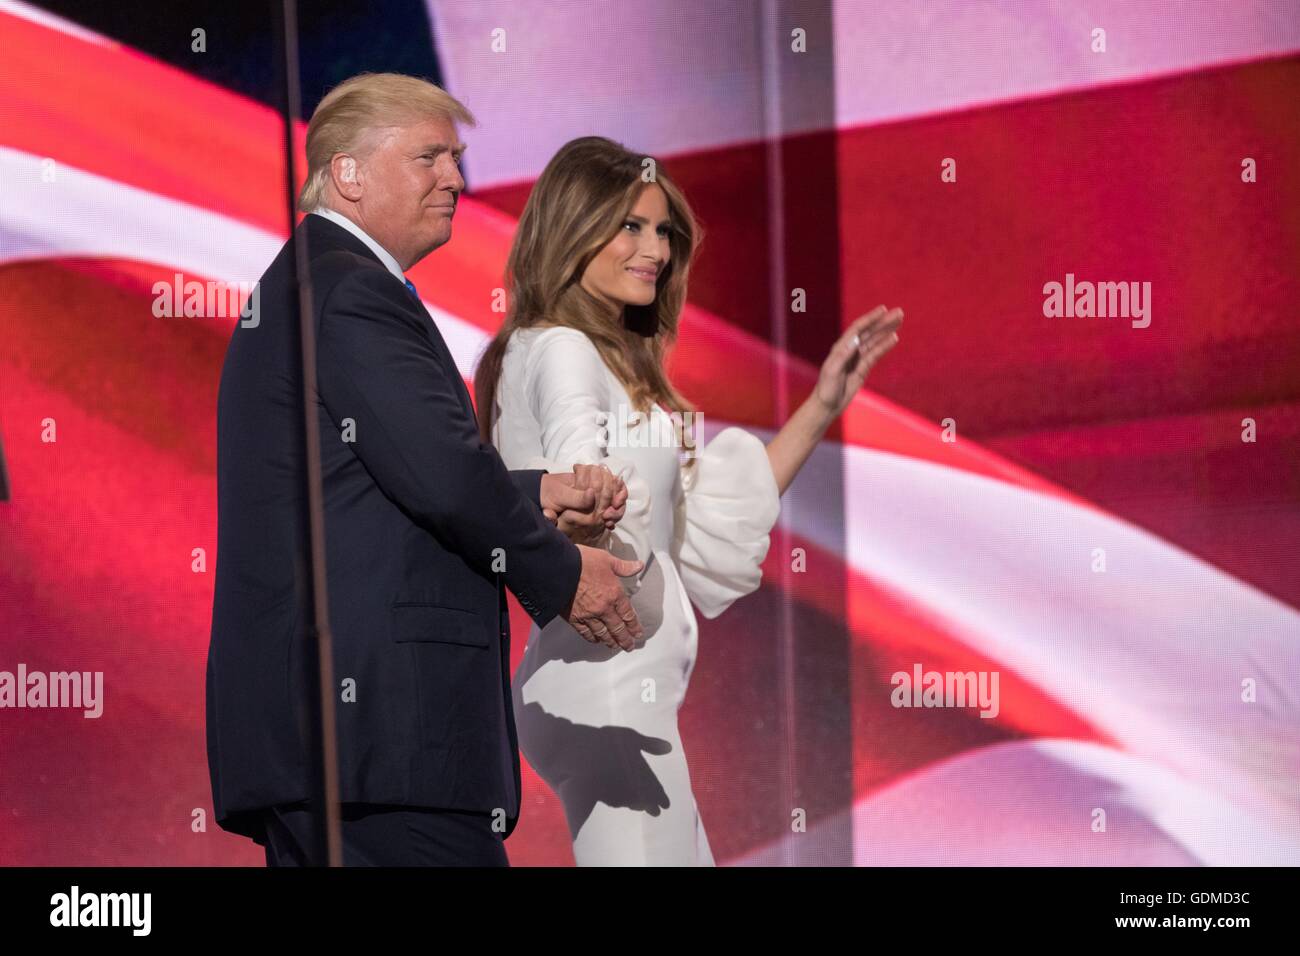 GOP presidential nominee Donald Trump escorts his wife Melania Trump off stage following her address during the first day of the Republican National Convention at the Quicken Loans Center July 18, 2016 in Cleveland, Ohio. Stock Photo